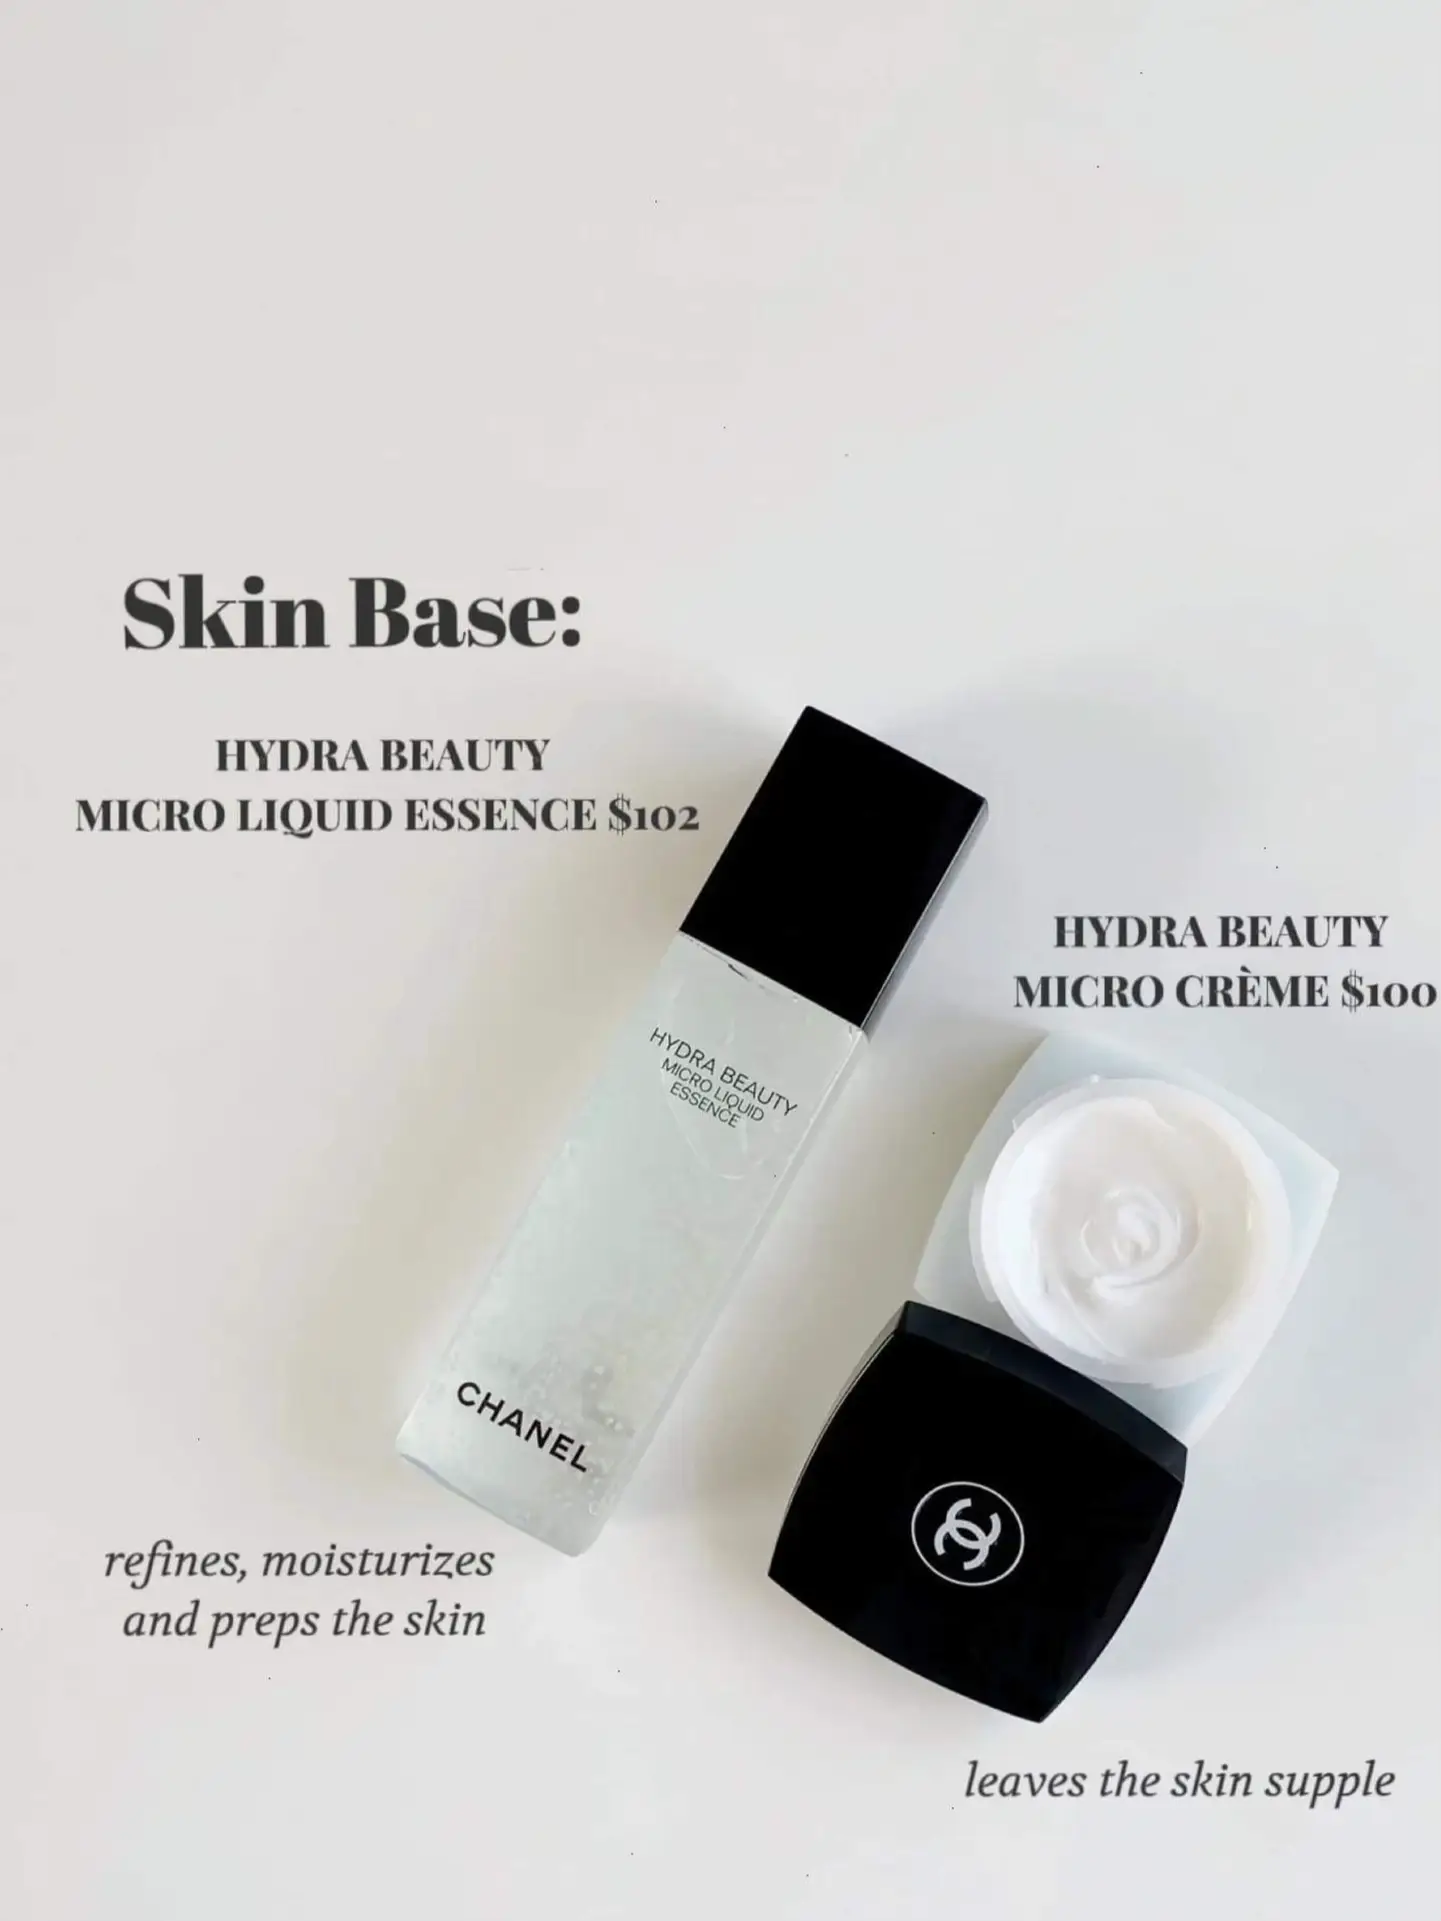 Full Face of Chanel: skincare and makeup, Gallery posted by olivia.xx